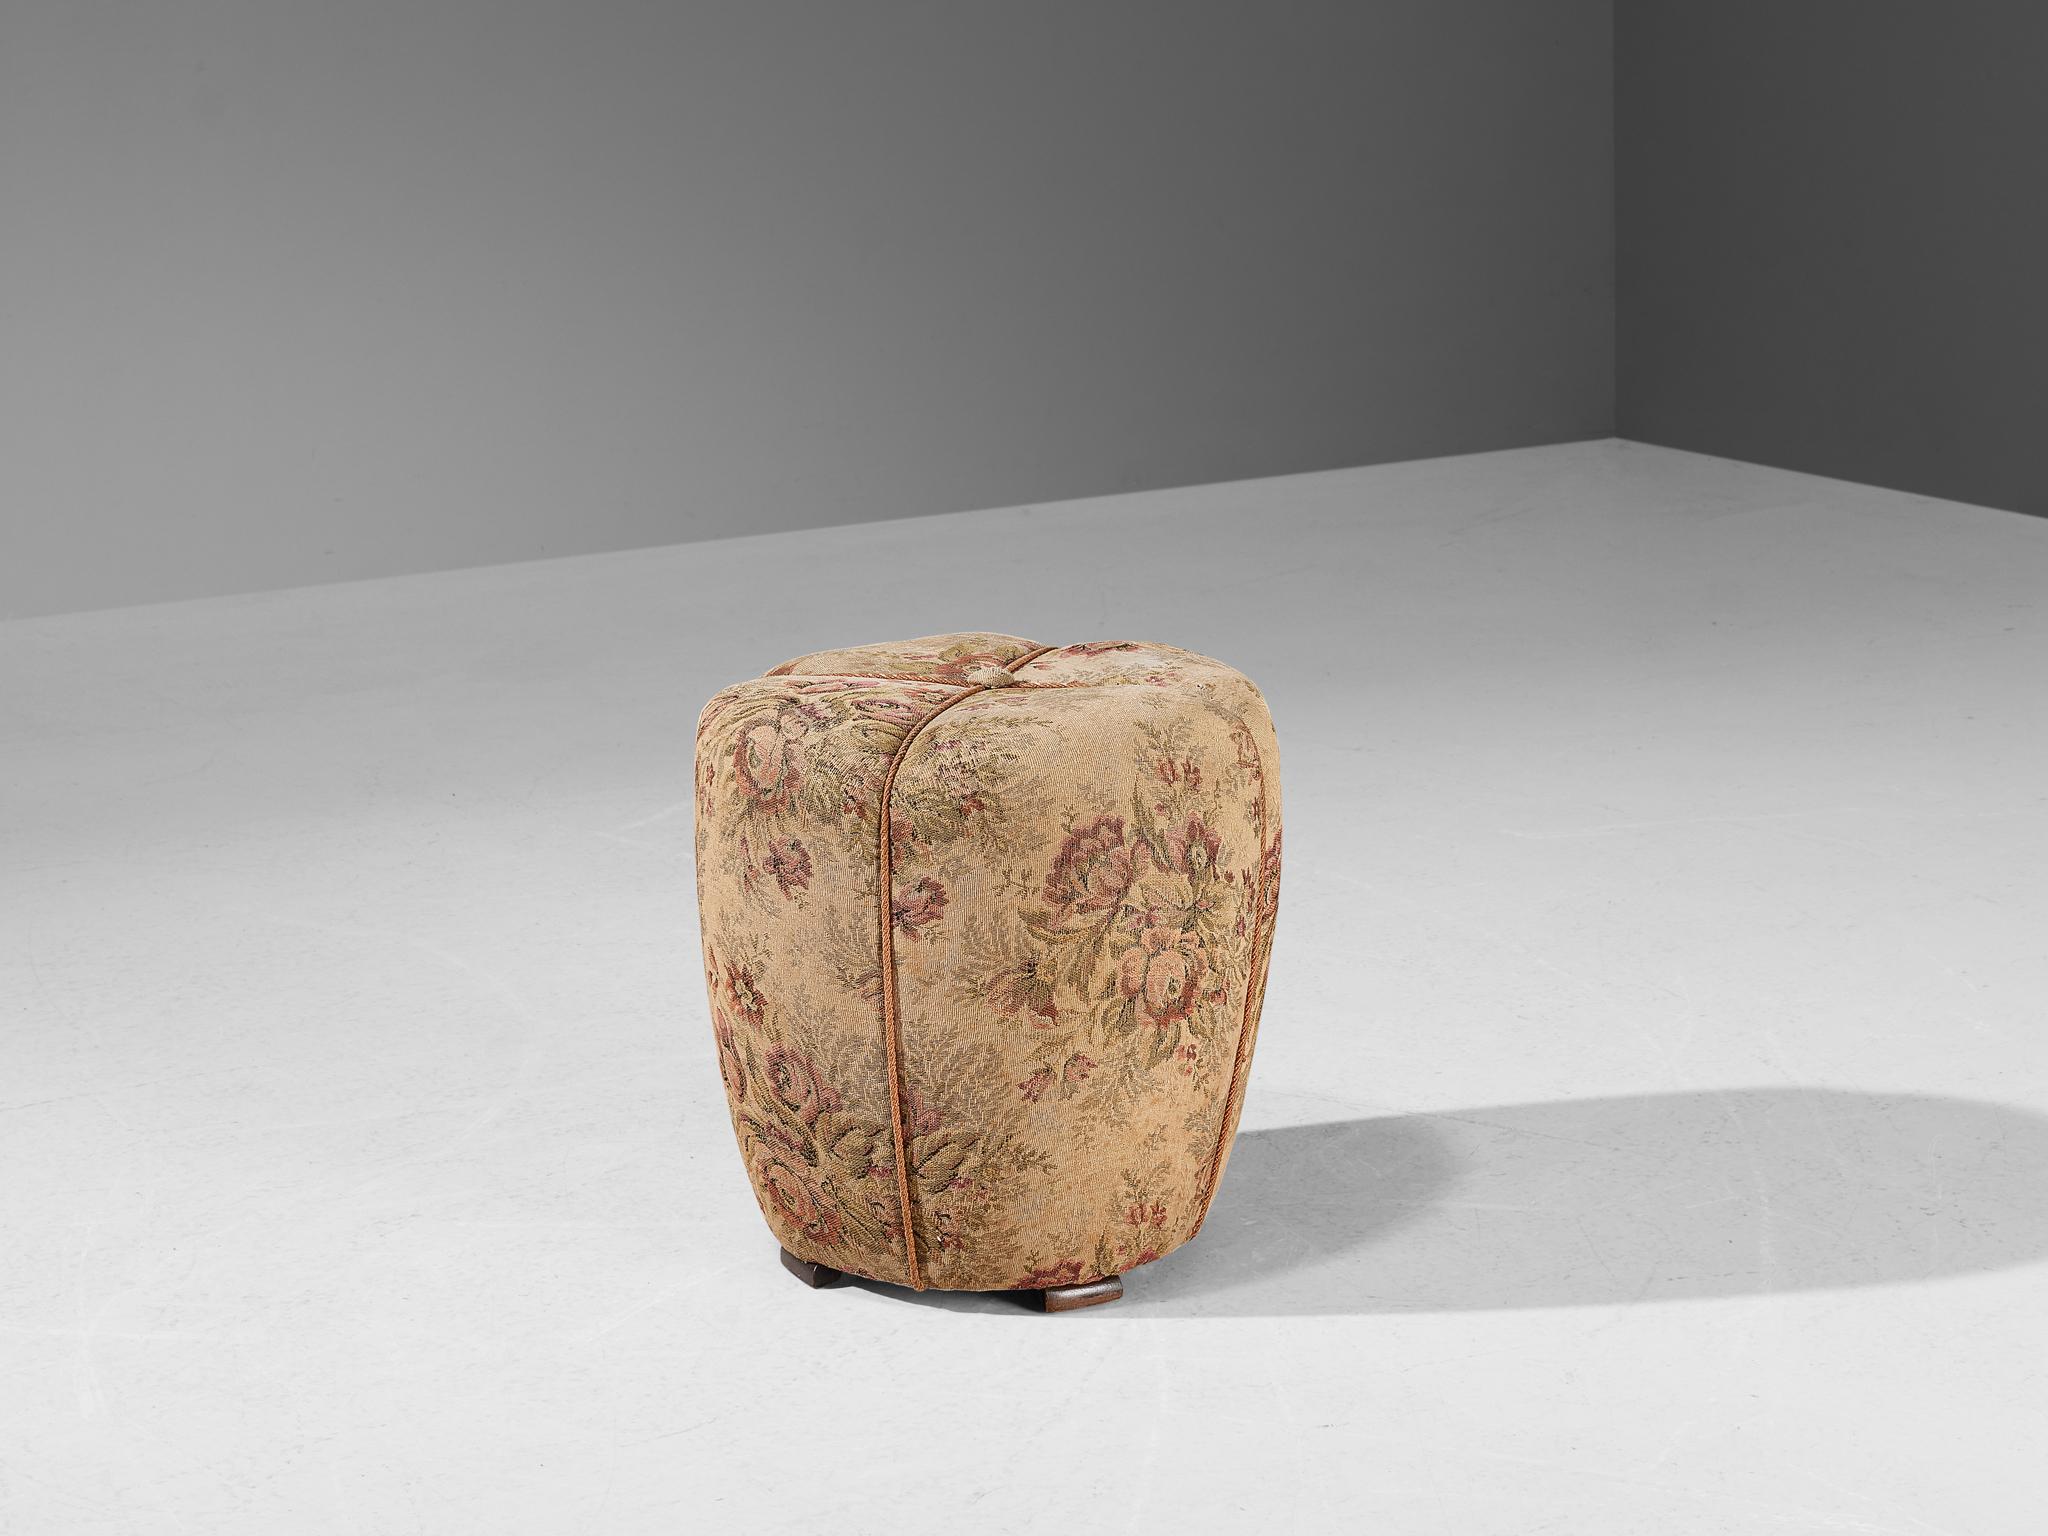 Jindrich Halabala for UP Závody, footstool, tabouret, ottoman or pouf, fabric, stained wood, Czech Republic, 1930s.

This poetic pouf is designed in the 1930s when the Art Deco Period was at its highest point and distinguishes itself by means of